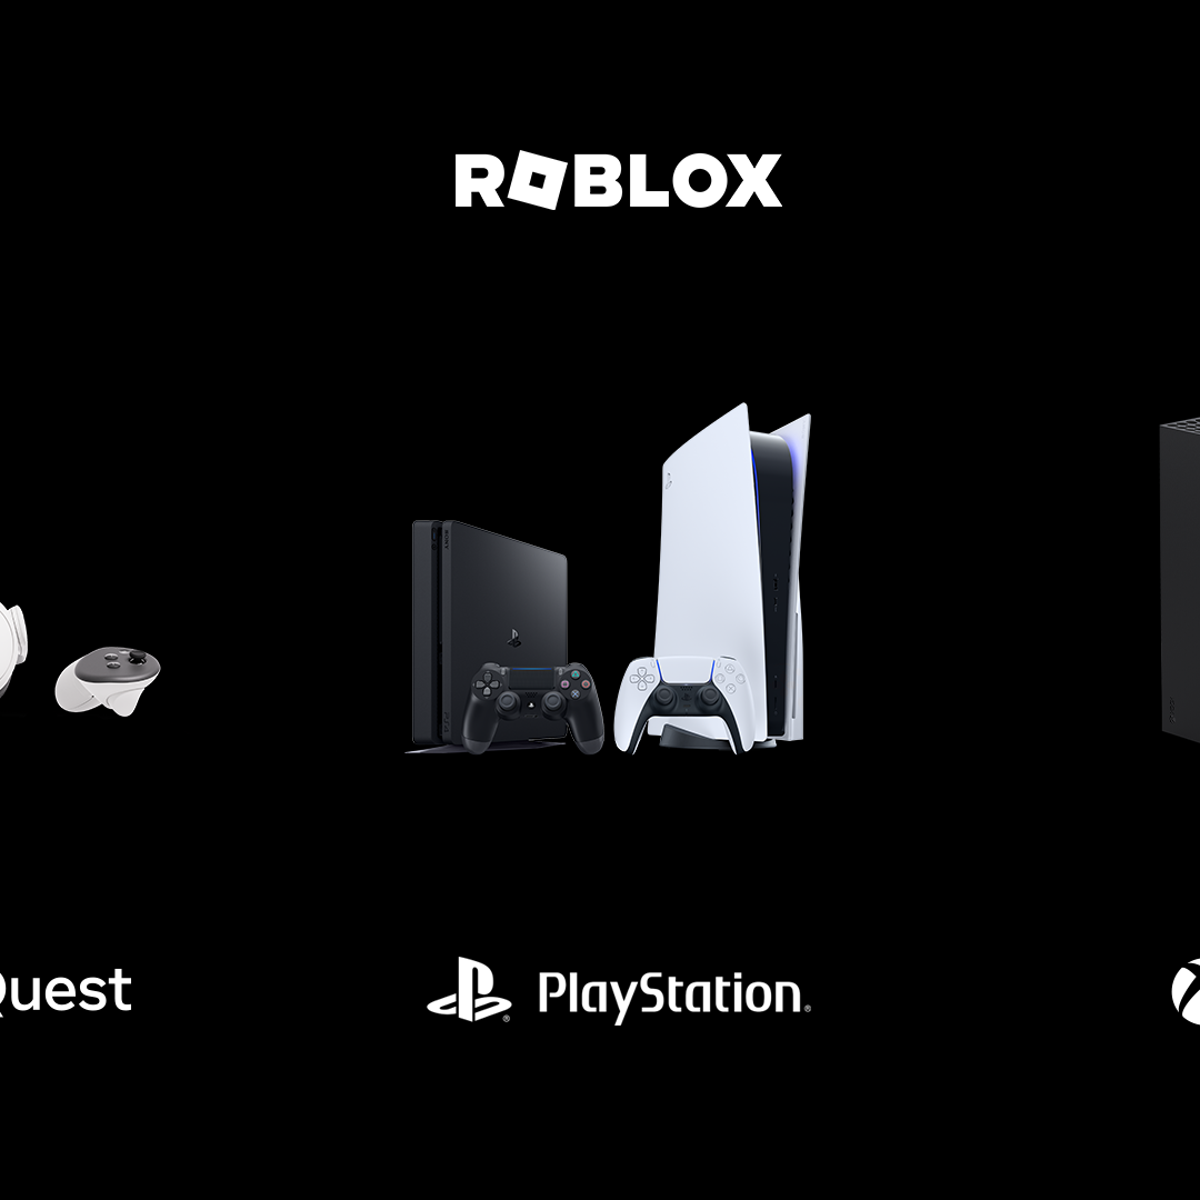 Roblox on PlayStation - EVERYTHING You NEED to Know! (Free to Play